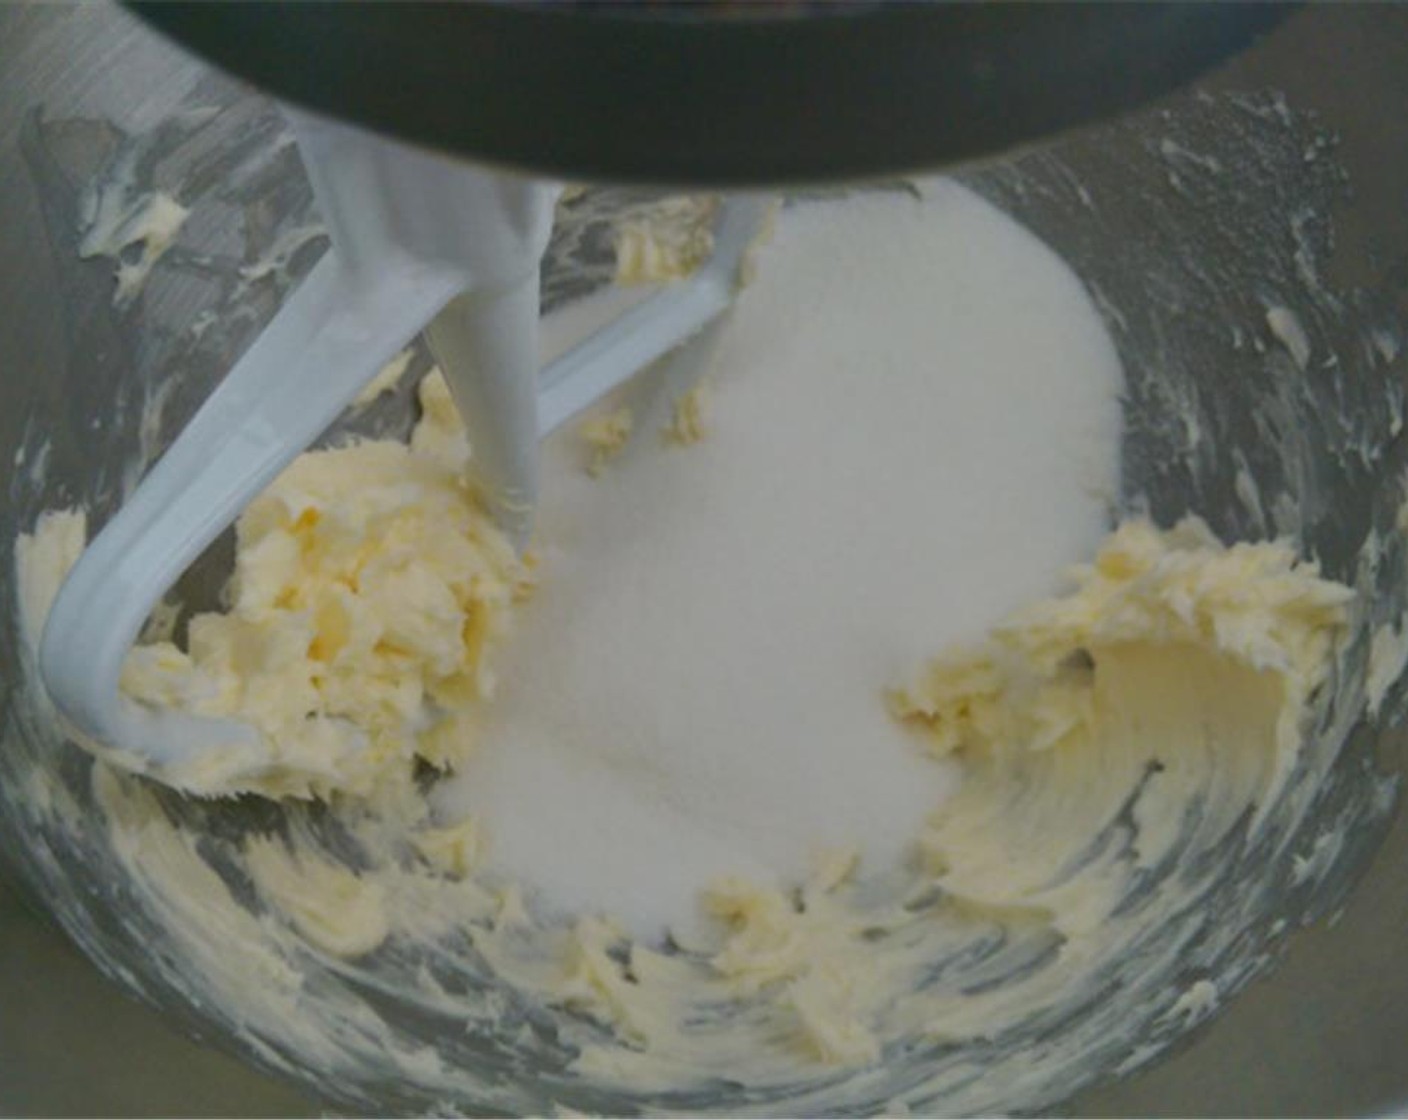 step 2 Cream Unsalted Butter (1/2 cup) and Granulated Sugar (3/4 cup) in the bowl of a stand mixer. Add Eggs (2) one at a time and mix until fully incorporated into the butter mixture.